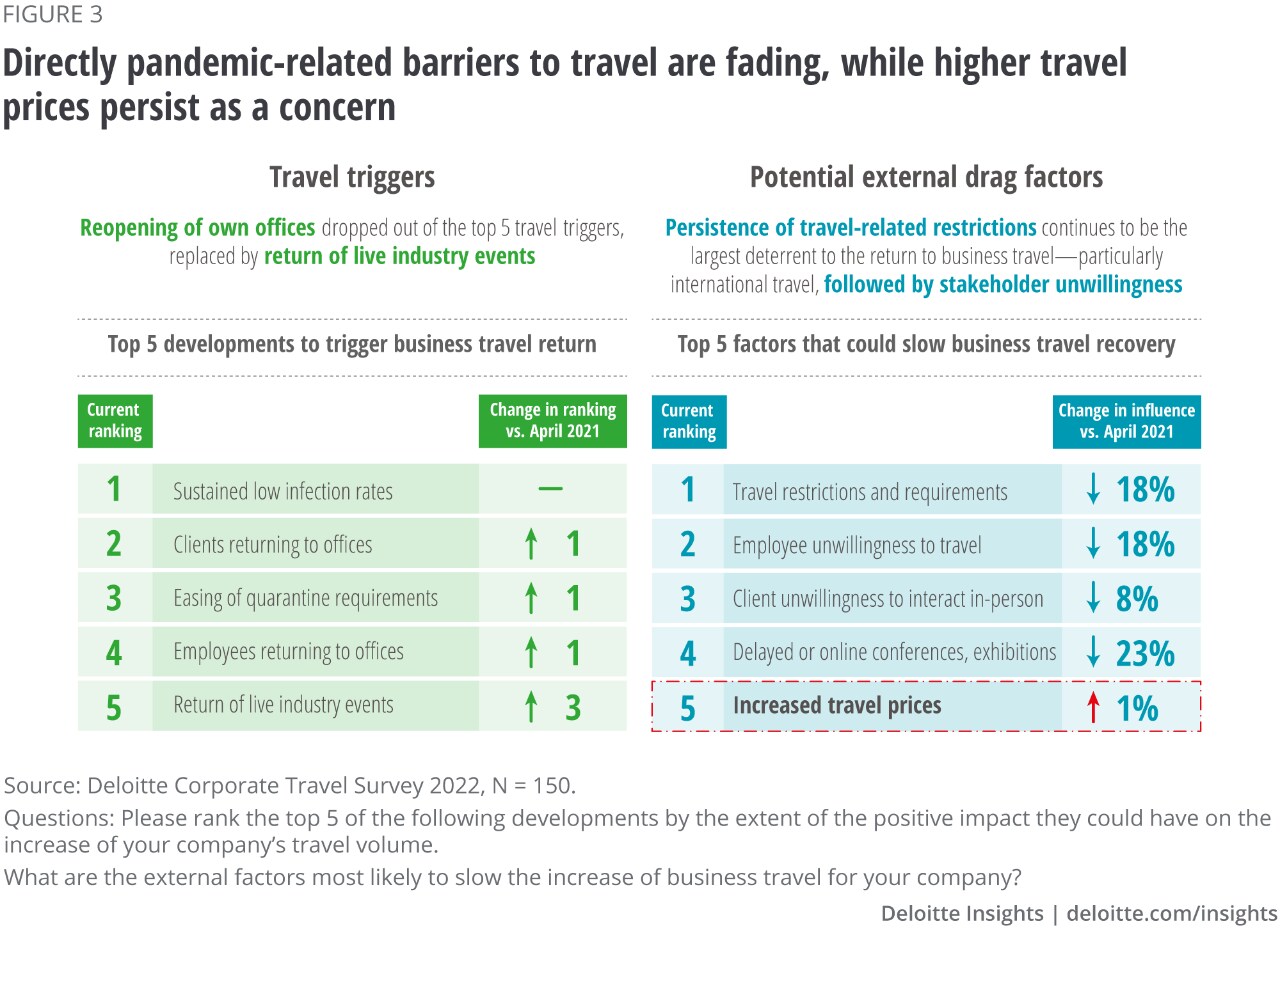 Figure 3. Directly pandemic-related barriers to travel are fading, while higher travel prices persist as a concern